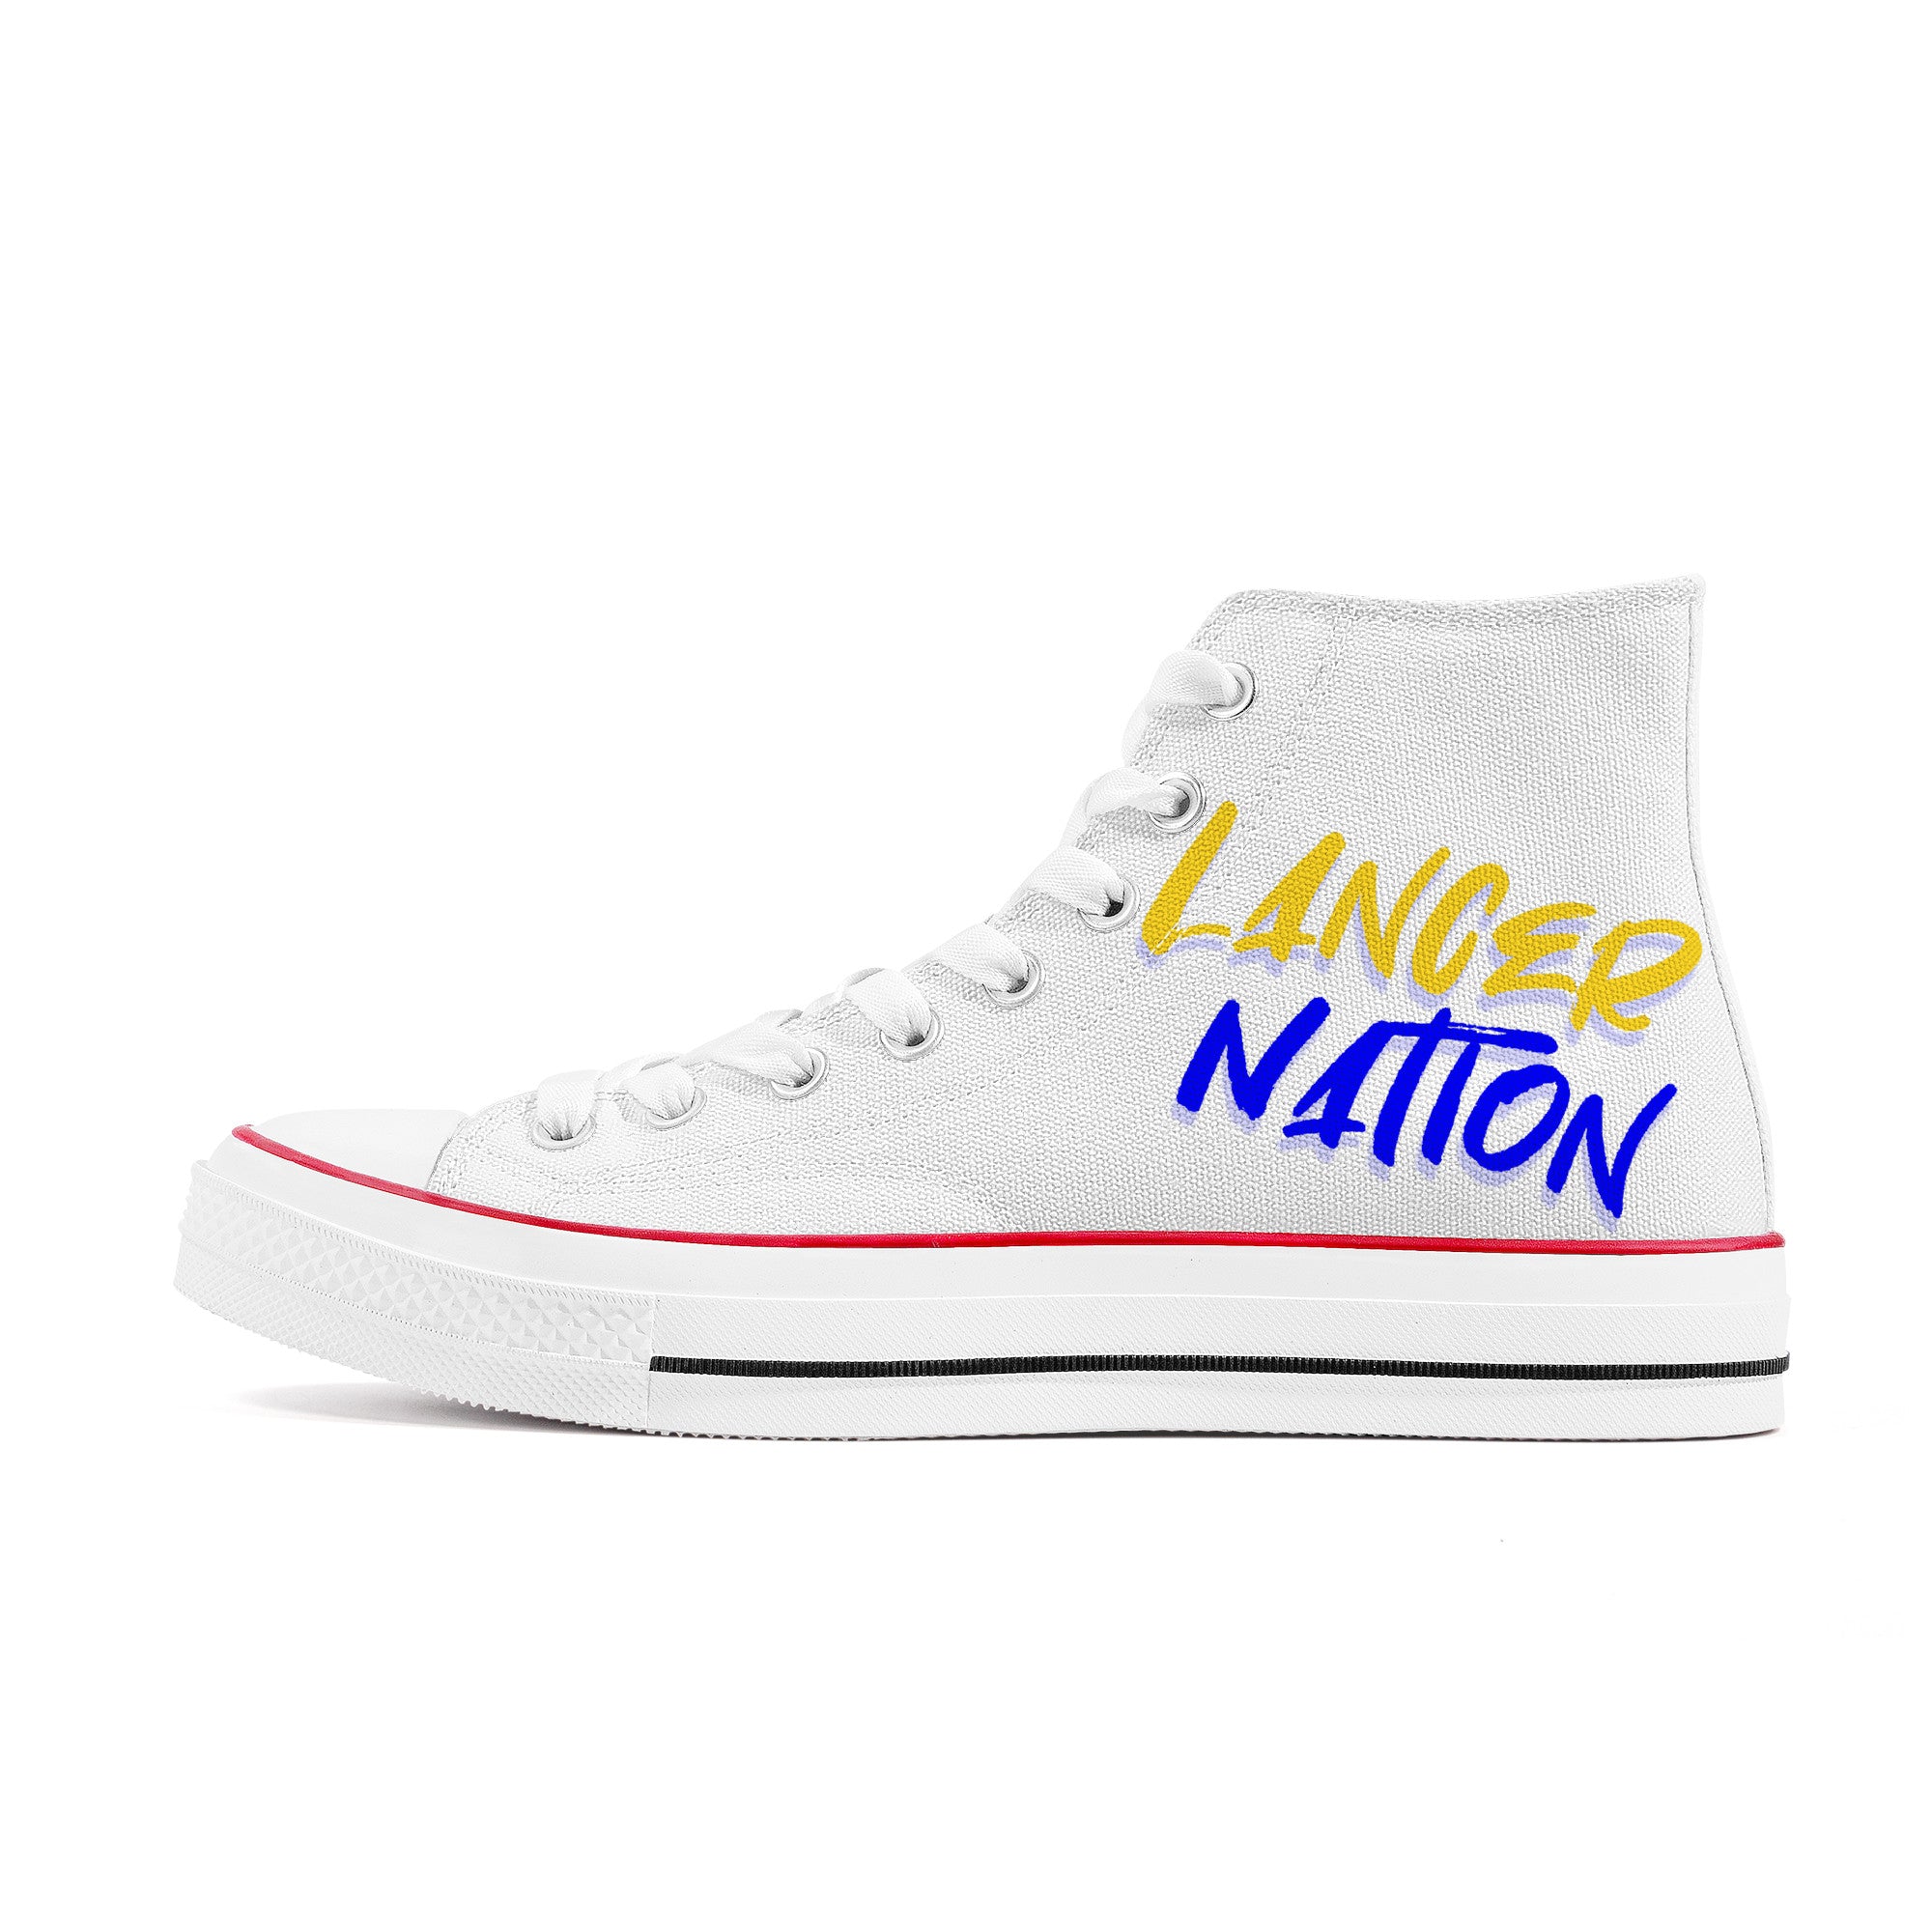 Nick Muench V5 Custom Shoes | High Top Canvas Shoes - White - Shoe Zero